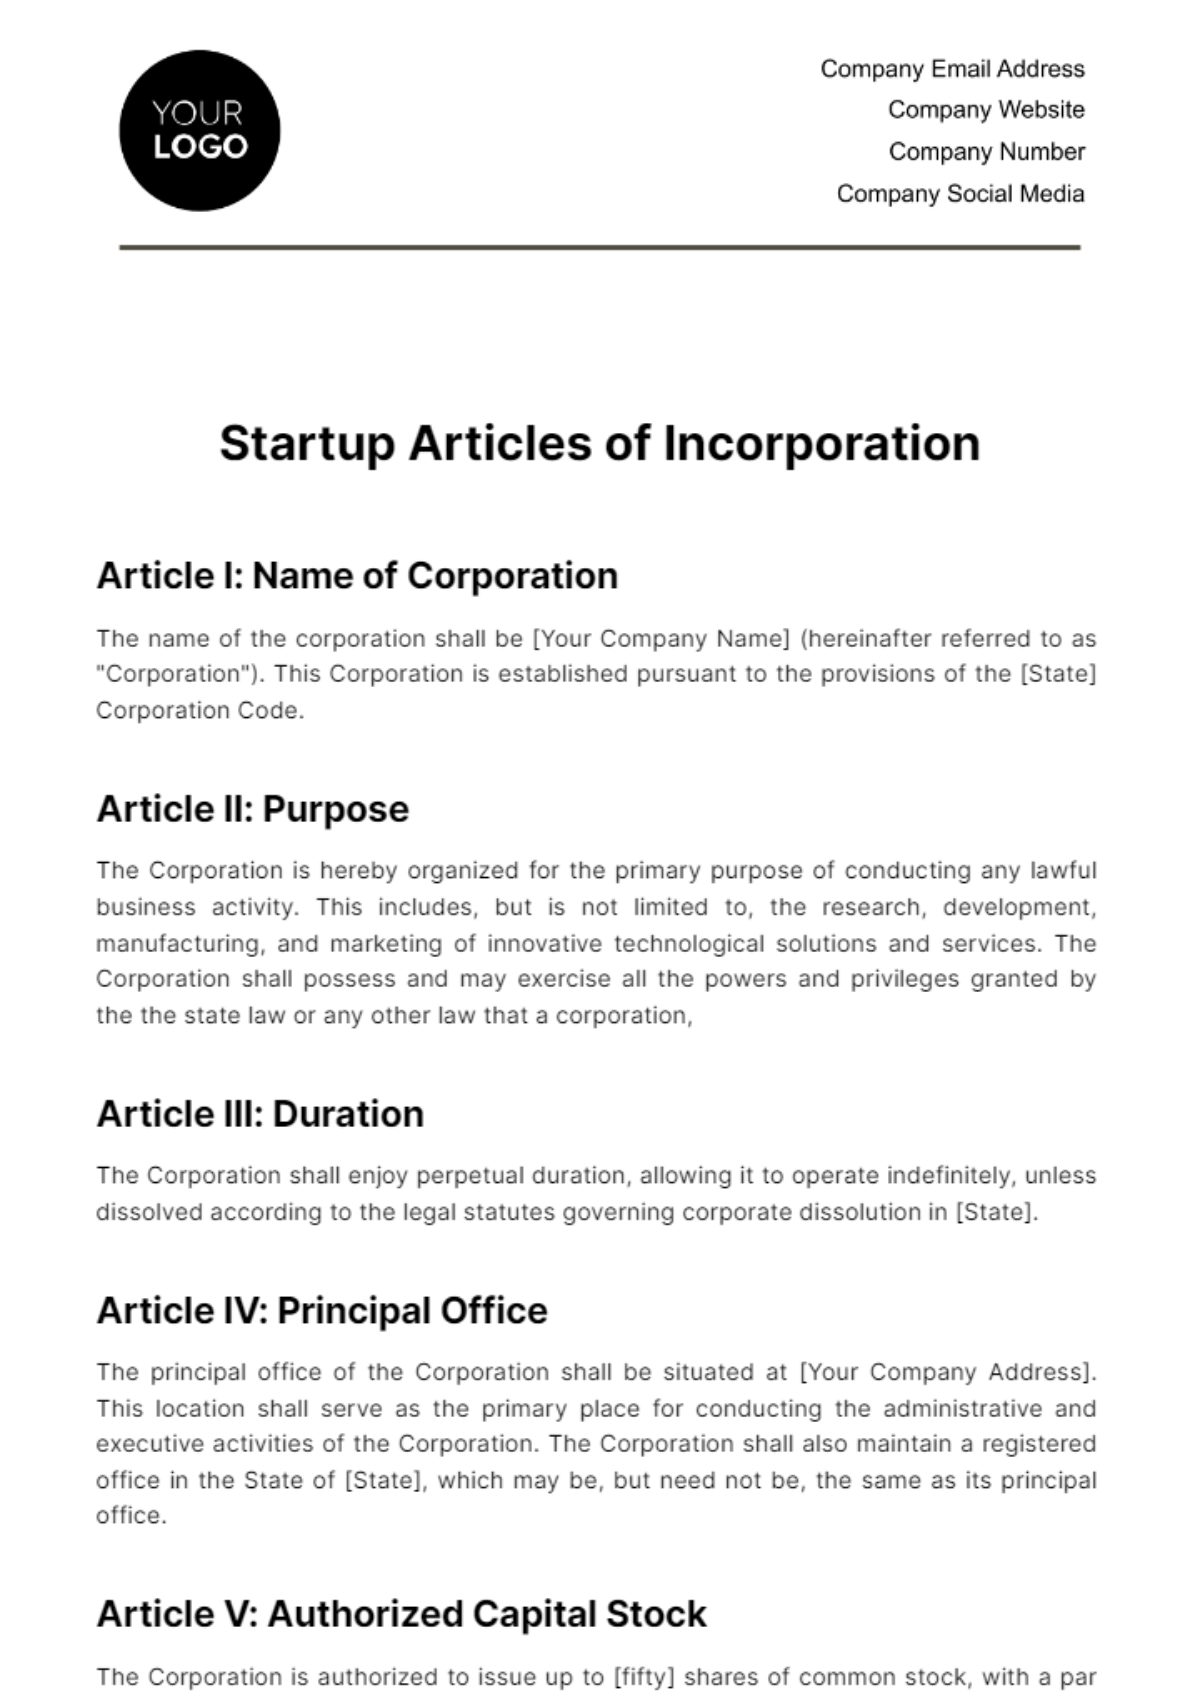 Free Startup Articles of Incorporation Template